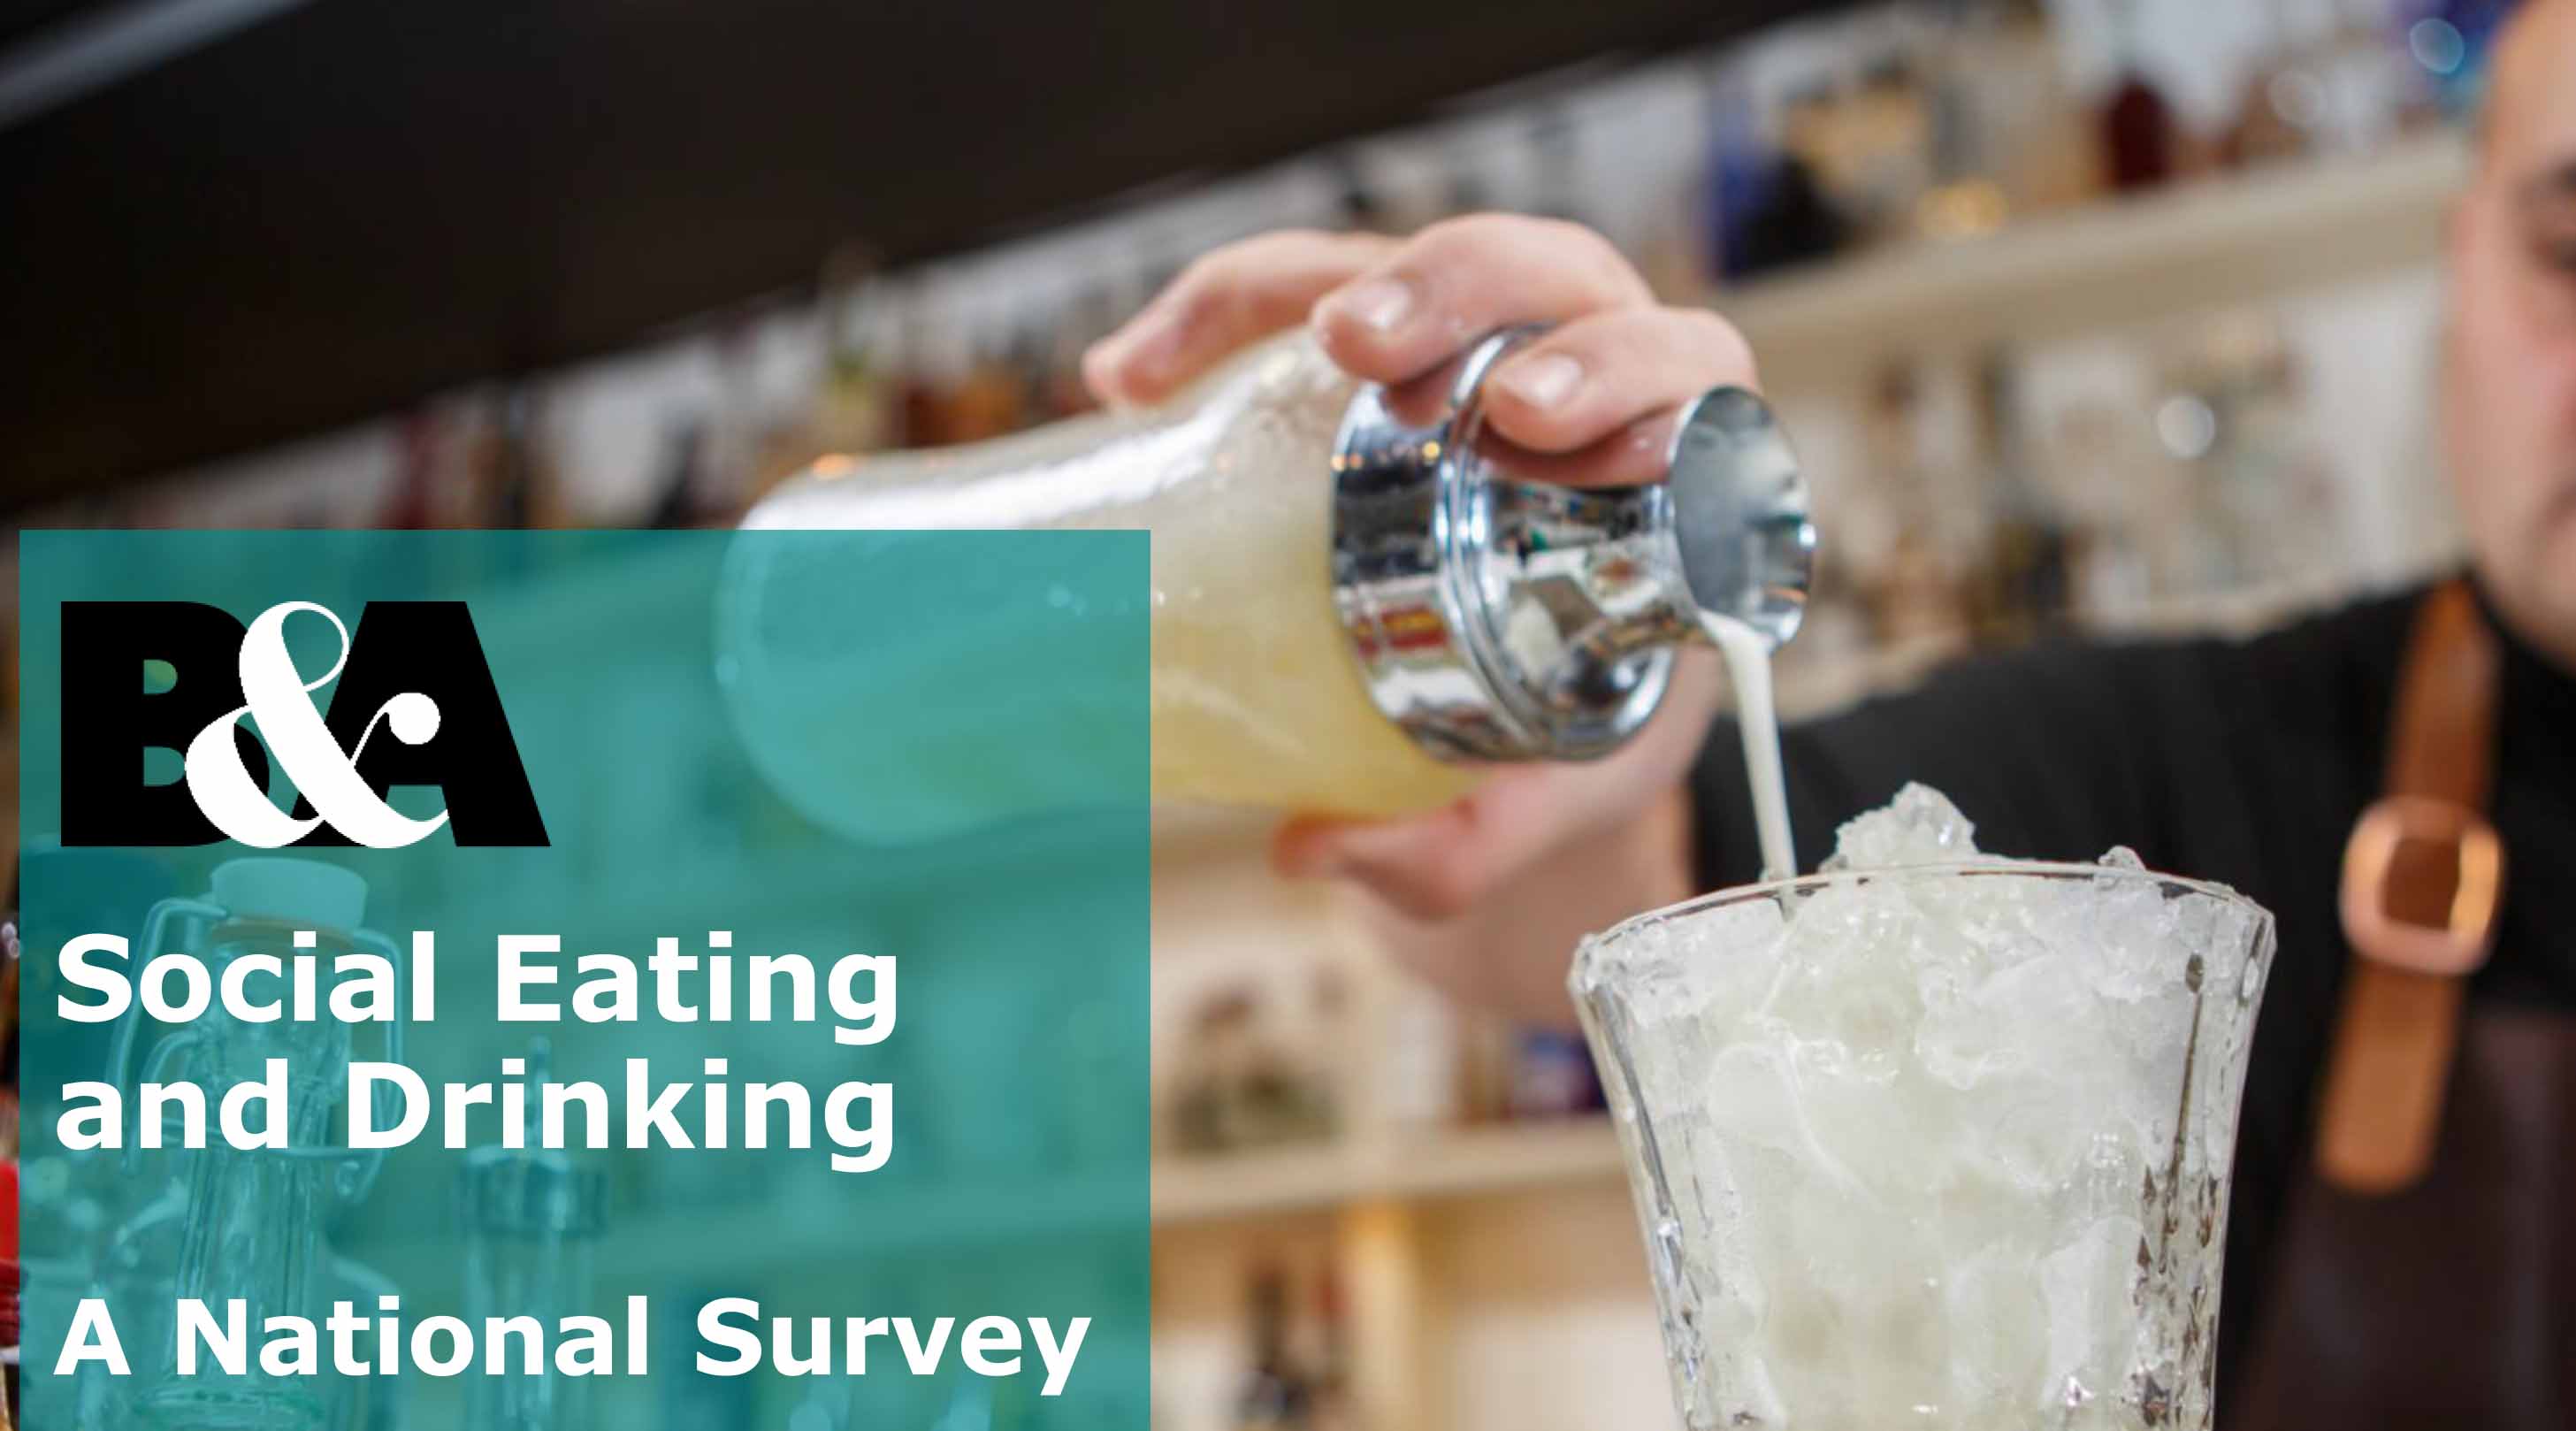 A Behaviour & Attitudes’ survey into Social Eating & Drinking in Ireland last Spring found Irish consumers to be a very social grouping.